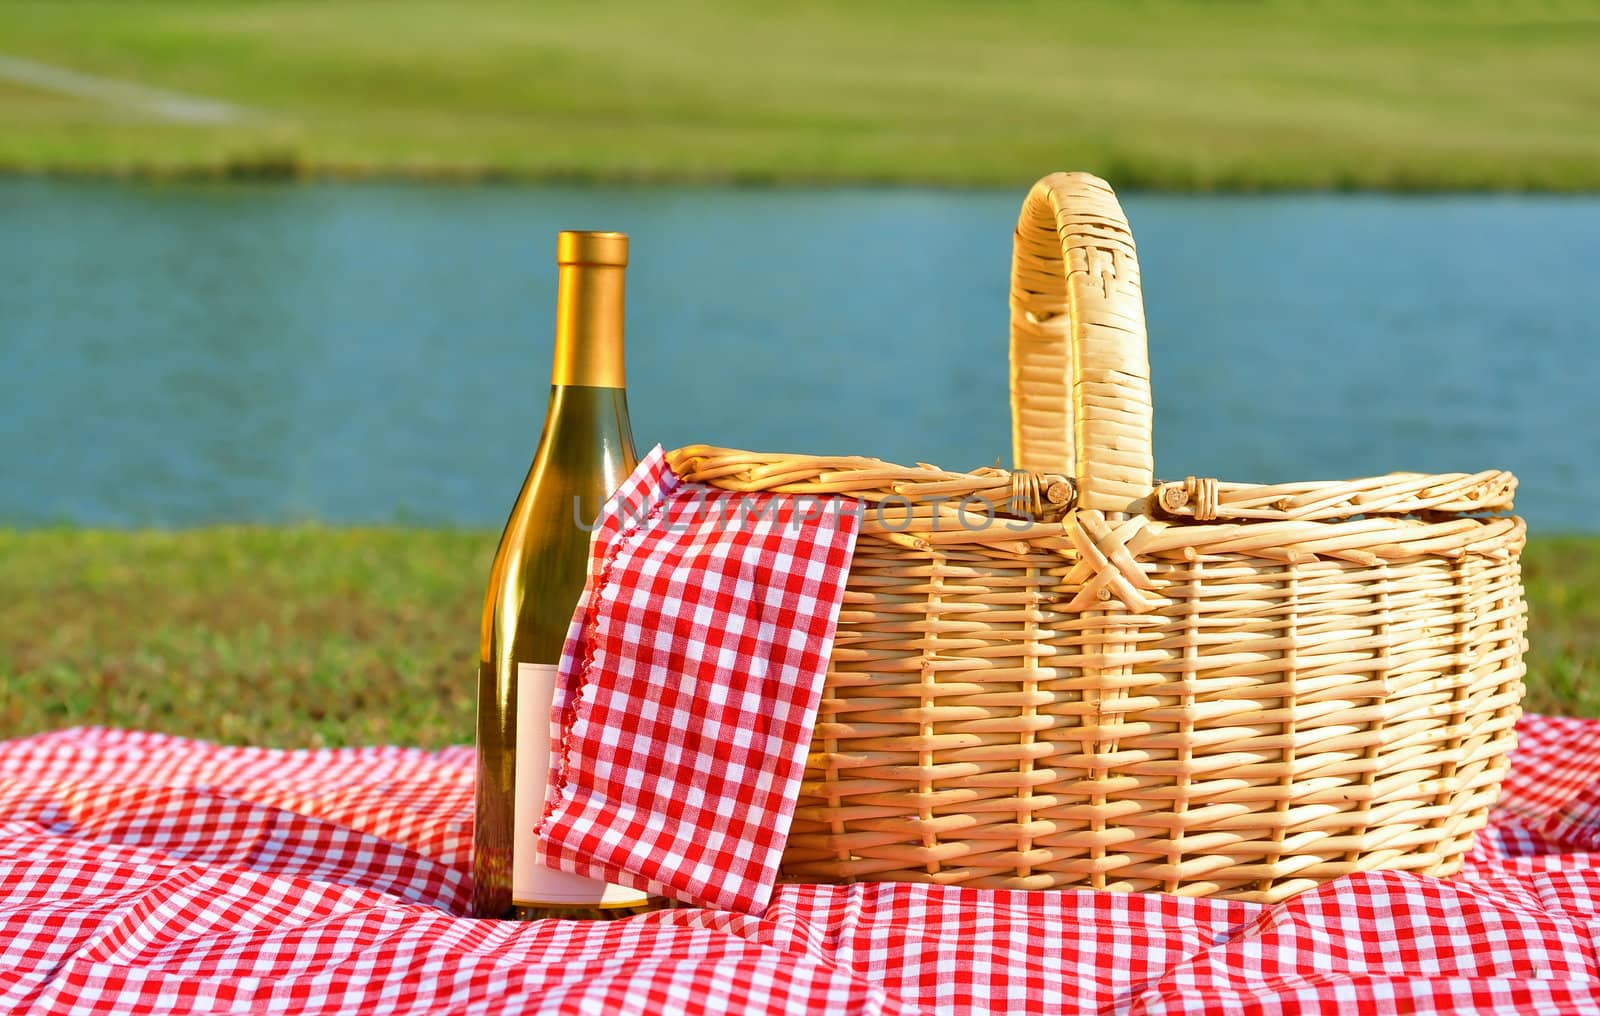 Picnic Basket and Wine by dehooks